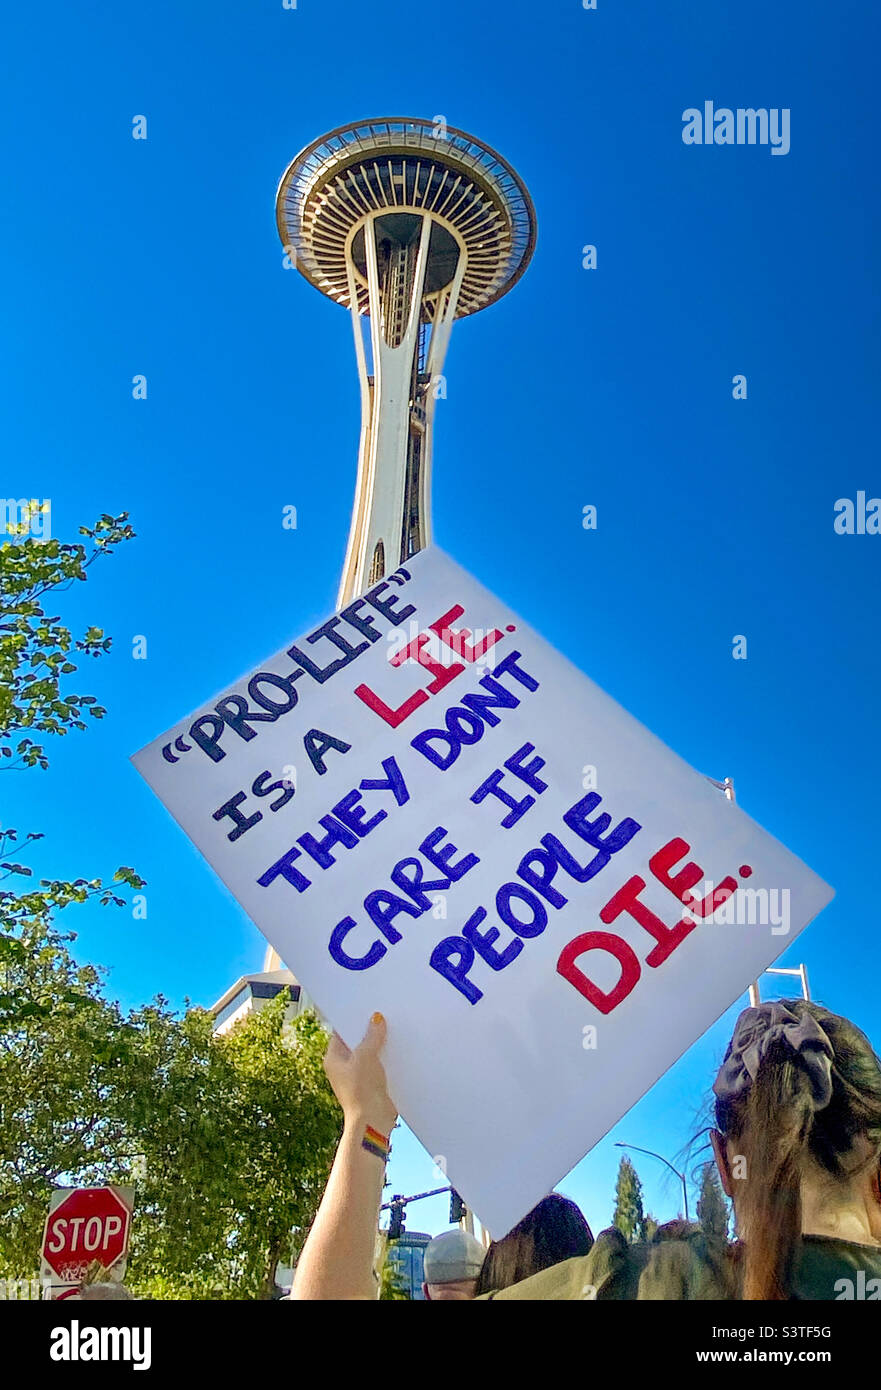 Protest signs against the July 24, 2022 ruling by the Supreme Court to overturn the landmark 1973 Roe v Wade, thereby ceasing federal protection for abortion in the US. Seattle, 7/26/2022 Stock Photo